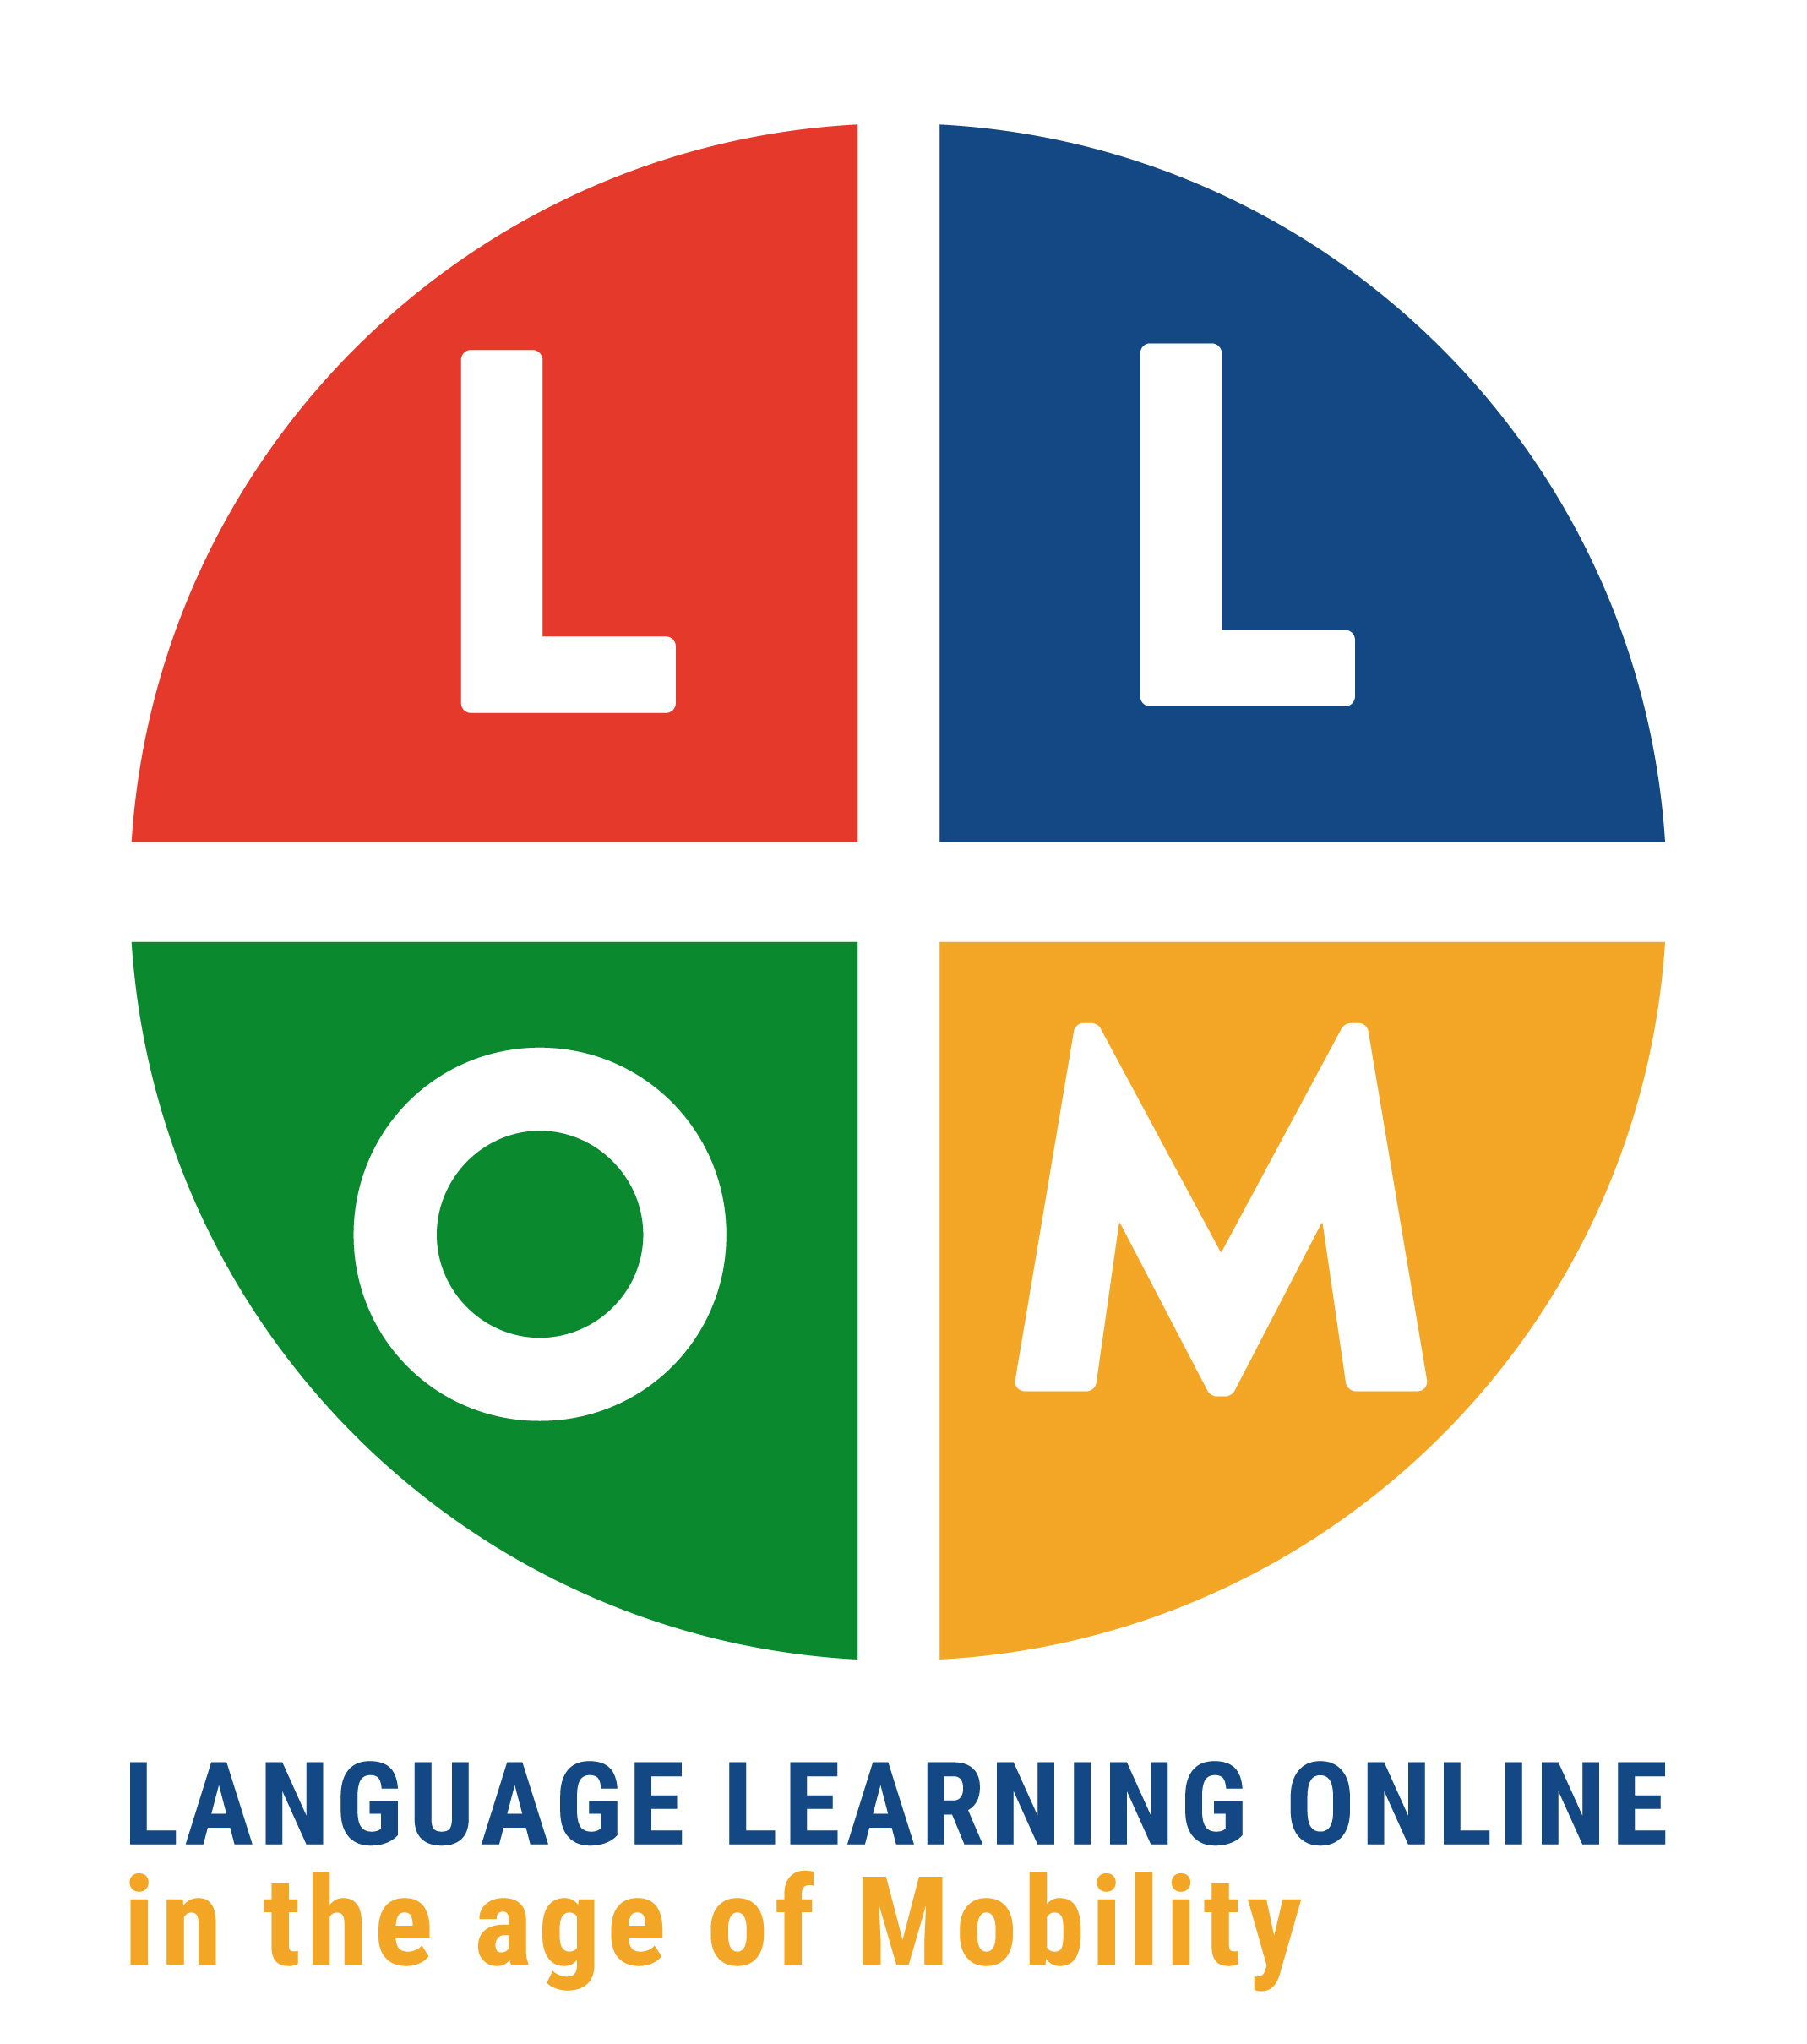 LLOM Language Learning Online in the Age of Mobility